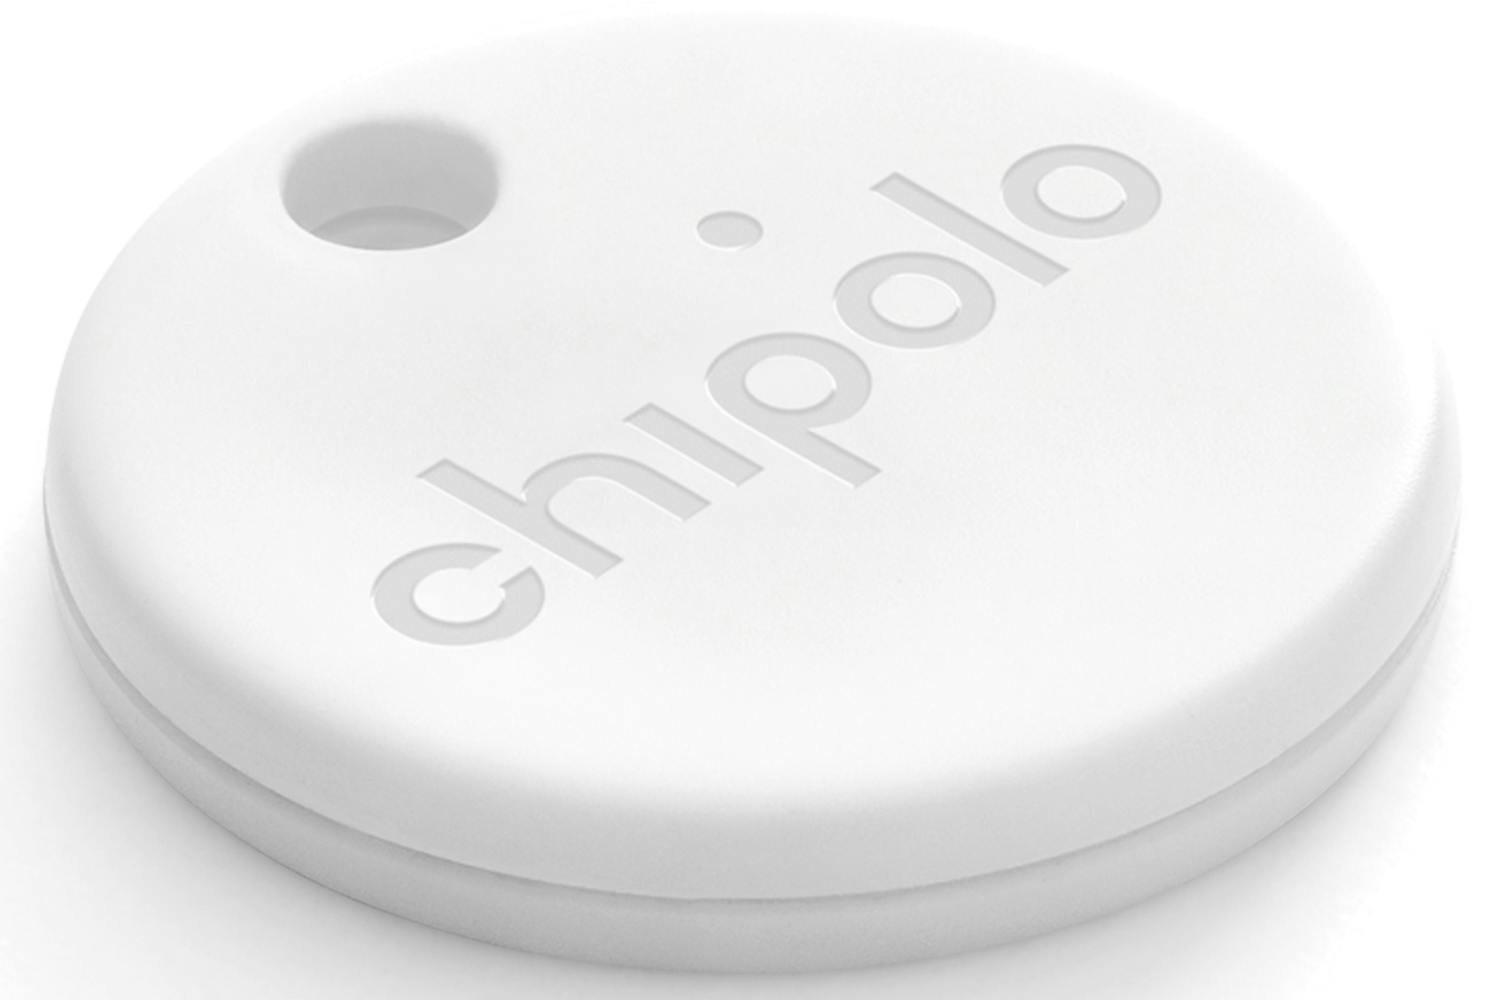 Chipolo One Bluetooth Item Finder | White